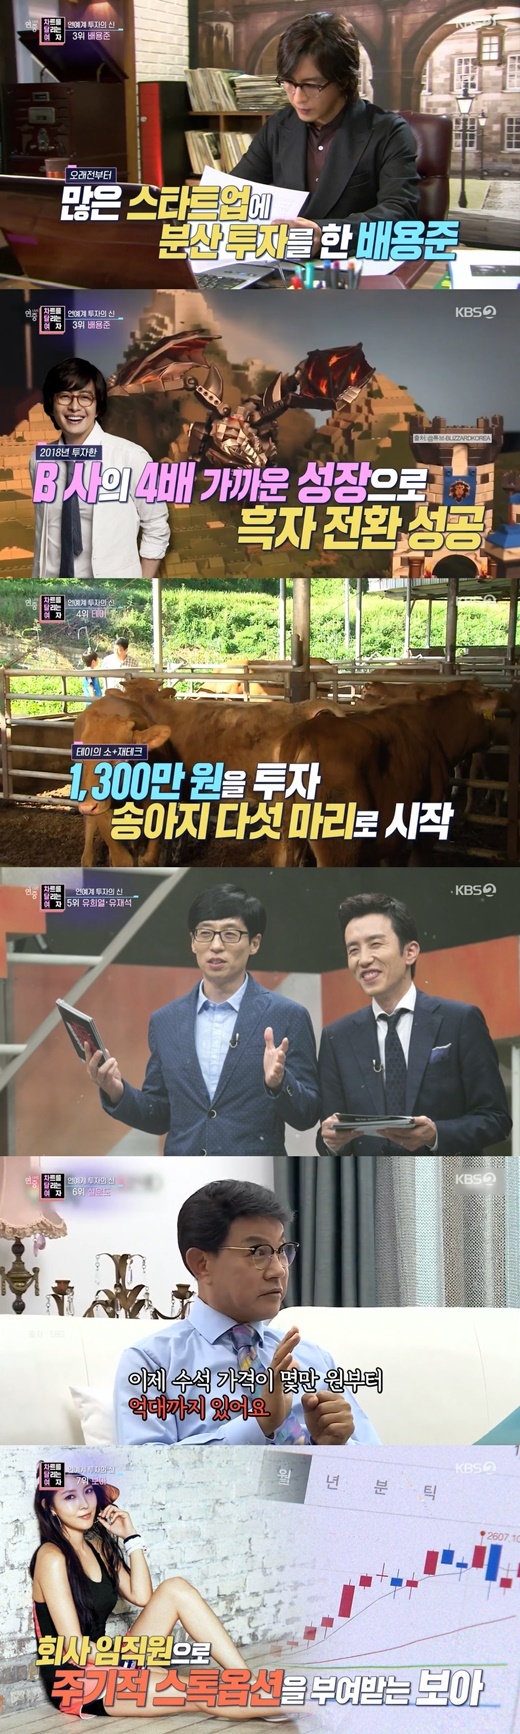 Actor Lee Je-hoon has been ranked # 1 in KBS 2TV Year-round live entertainment industry investment.KBS 2TV Year-round live and The woman running the chart corner broadcasted on the night of the 7th revealed the god of entertainment investment.The top spot was Baro Lee Je-hoon.In 2015, Lee Je-hoon became an investor in StartUp Angel, the early stage of its founding, with the introduction of Jang Duk-soo, chairman of DS Asset Management.Among the companies he invested in, the really big hit company is Baro Market Curly.Market Curly said in a broadcast, There were about 10 people who actually ordered at the beginning of the business, but now there are 5 million people.Market Curly has grown 60 times in three years and has become the number one online food delivery company. It is a unicorn company with a corporate value of about 4 trillion won.According to Year-round live, Lee Je-hoon invested hundreds of millions of won.Considering that Market Curlys sales growth rate is 300 times, the return on investment is estimated to be 150 ~ 200 times.Followed by Guillaume Patri, third place Bae Yong-joon, fourth place Tei, fifth place Yoo Jae-Suk and You Hee-yeol, sixth place Sulundo and seventh place BOA.Bae Yong-joon has also been an investor for a long time, showing interest in various StartUp companies.The company B, which invested in 2018, has grown nearly four times and succeeded in turning to black, and is expected to return to tens of billions of won.Tei and Sulundo attracted attention with their special investments: Tei was known as a sotech using cattle and Sulundo as a heat collector who collects chiefs.You Hee-yeol reinvested 7 billion won in Kakaos sale amount, which Kakao Enter acquired, and Yoo Jae-Suk also invested in the investment and secured the stake.The value of You Hee-yeol stake is estimated to have more than doubled.Finally, the BOA made a profit through its stock.In 2014, he was appointed as a non-registered director of SM Entertainment. He received periodic stock options Buyeo. BOA received Buyeo for 35,000 won per share and sold it three years later.After making a profit of about 130 million won, it continued to sell it at its high point, leaving a profit of 124 million won in 2019 and a profit of 155.6 million won in 2021.